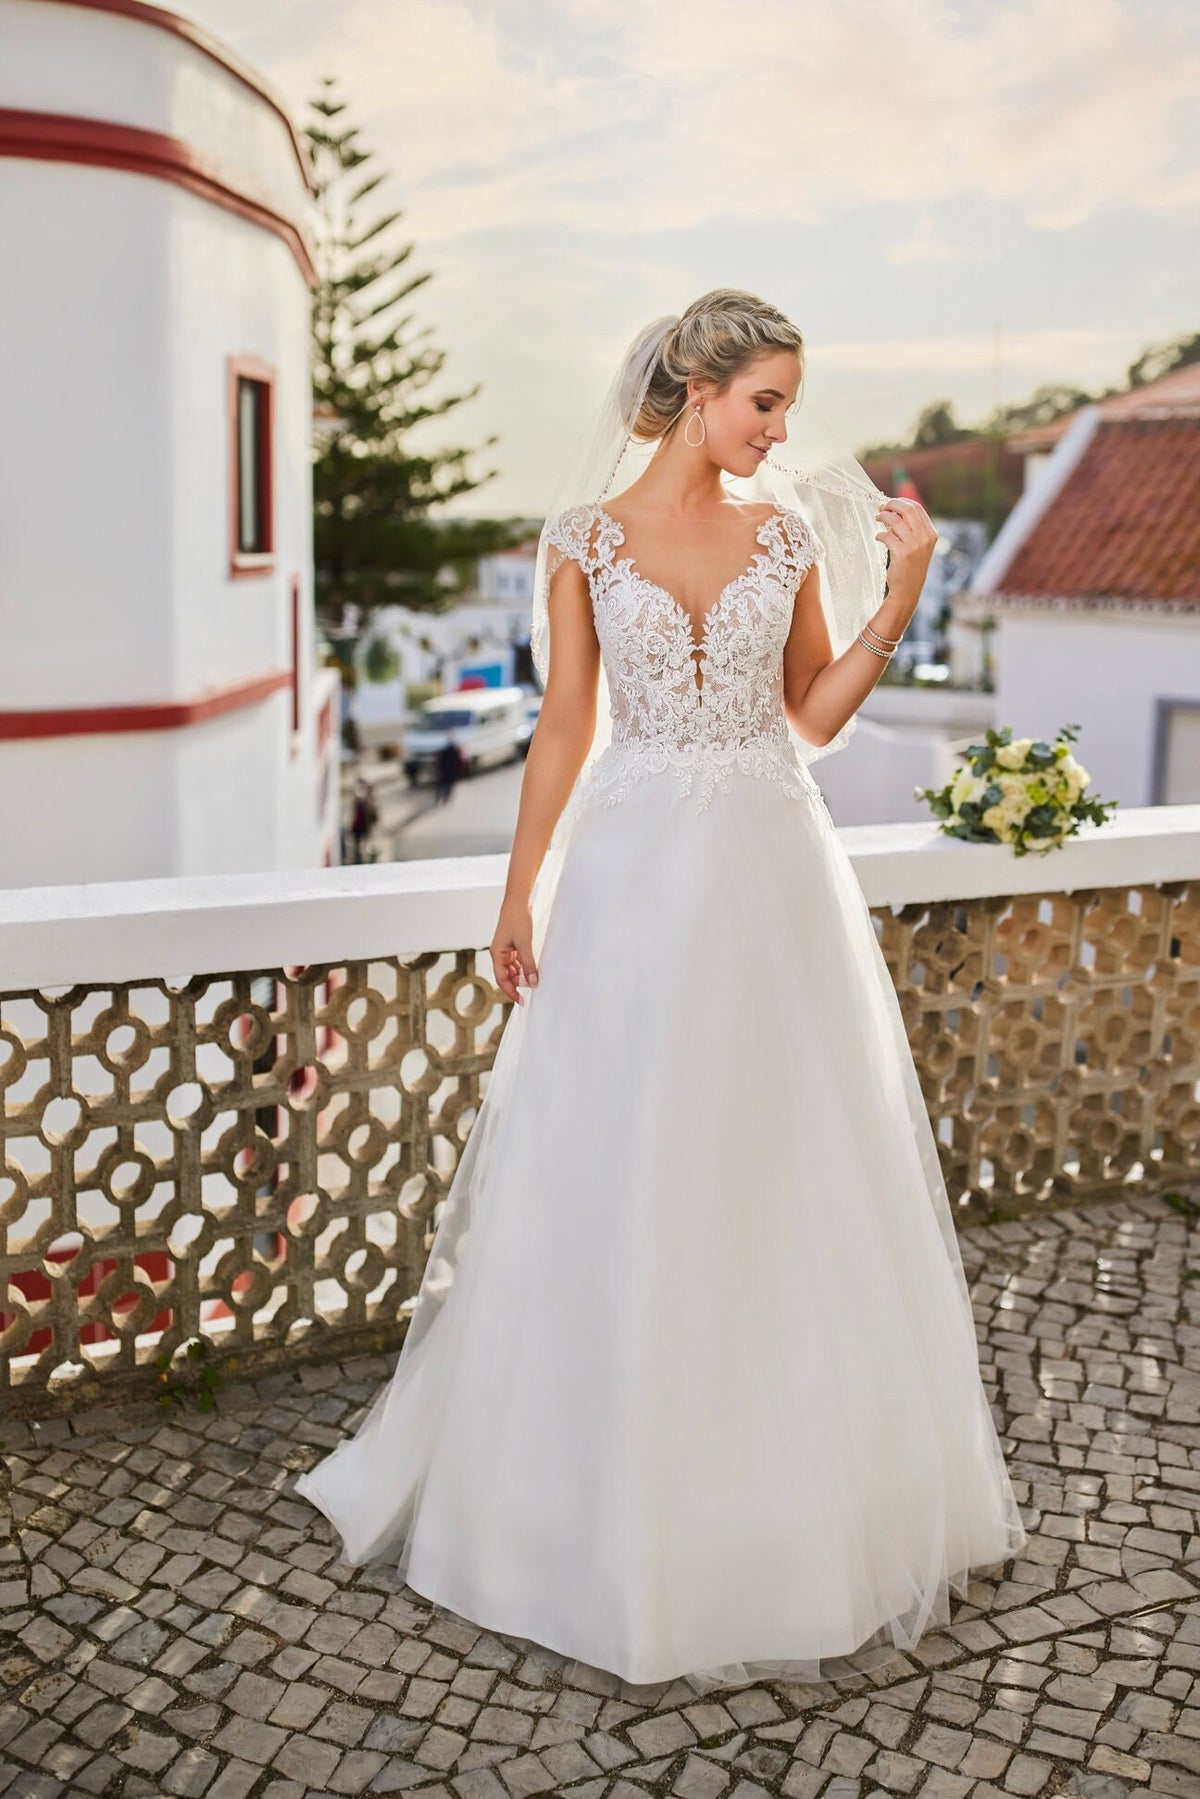 Beautiful Classic ALine Short Cap Sleeves Sweetheart Neckline Wedding Dress Bridal Gown Train Open Back Lace Bodice Tulle Skirt Timeless